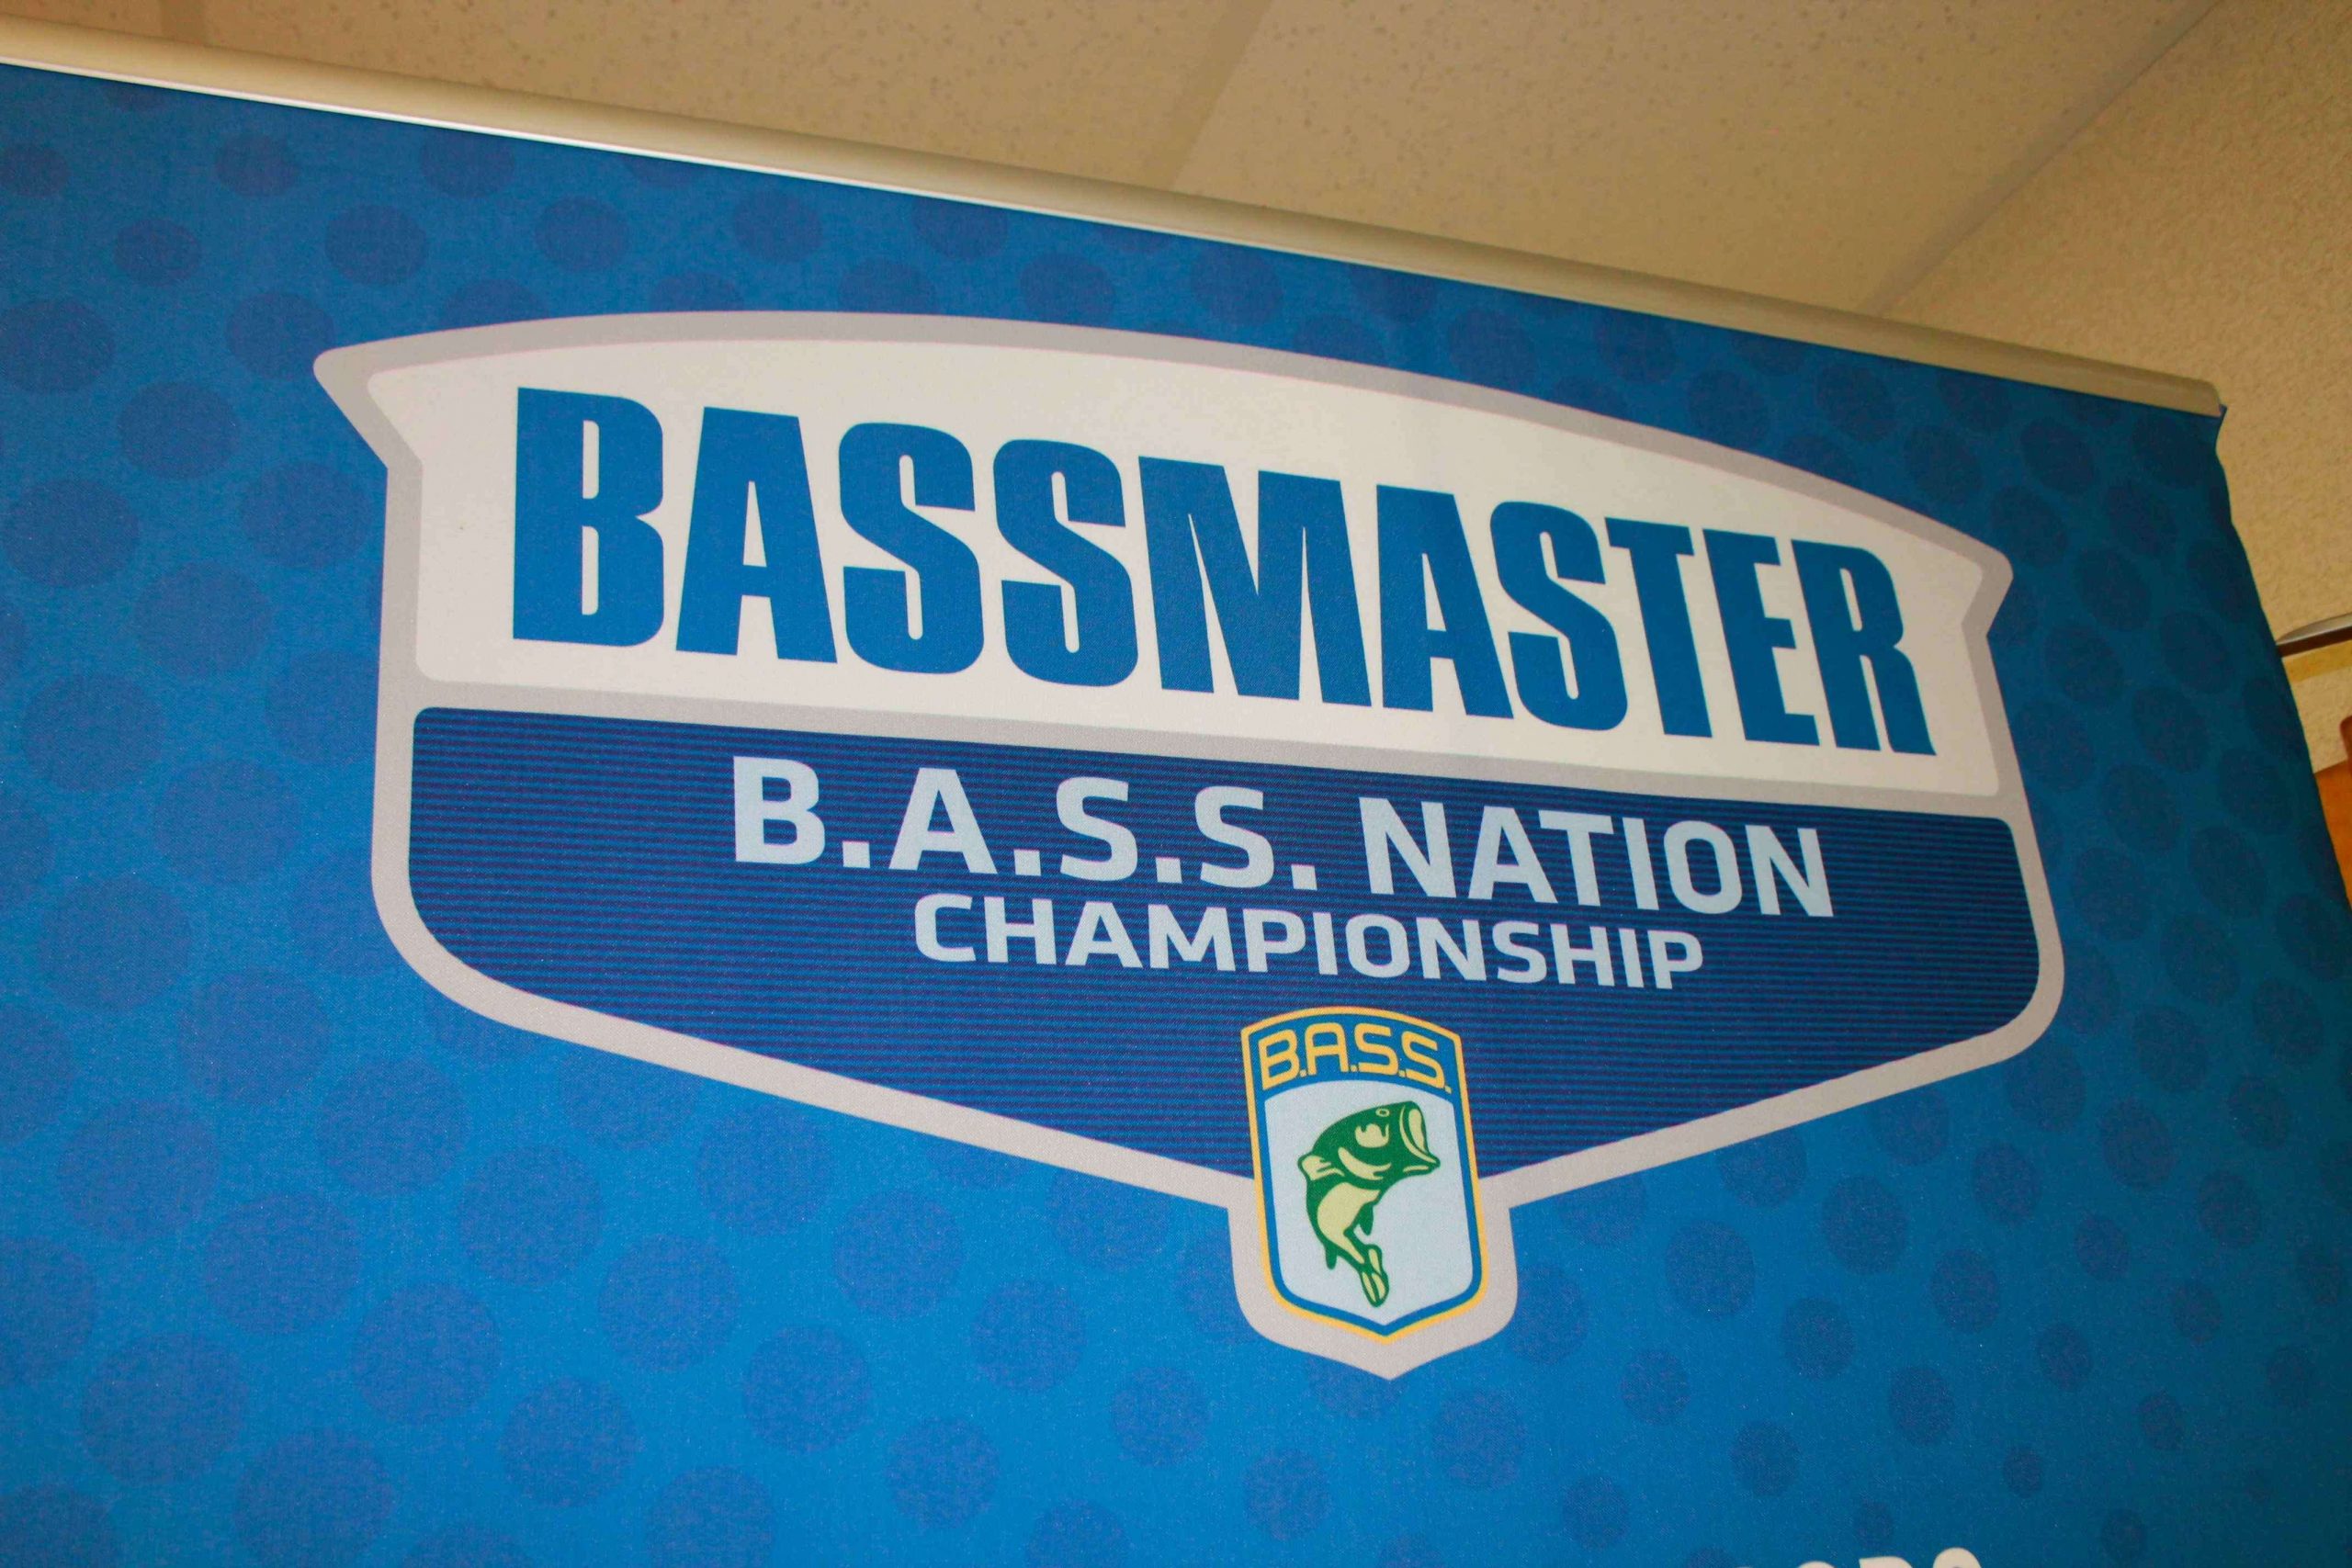 Welcome to the B.A.S.S. Nation Central Divisional. Angler registration was held in â¦